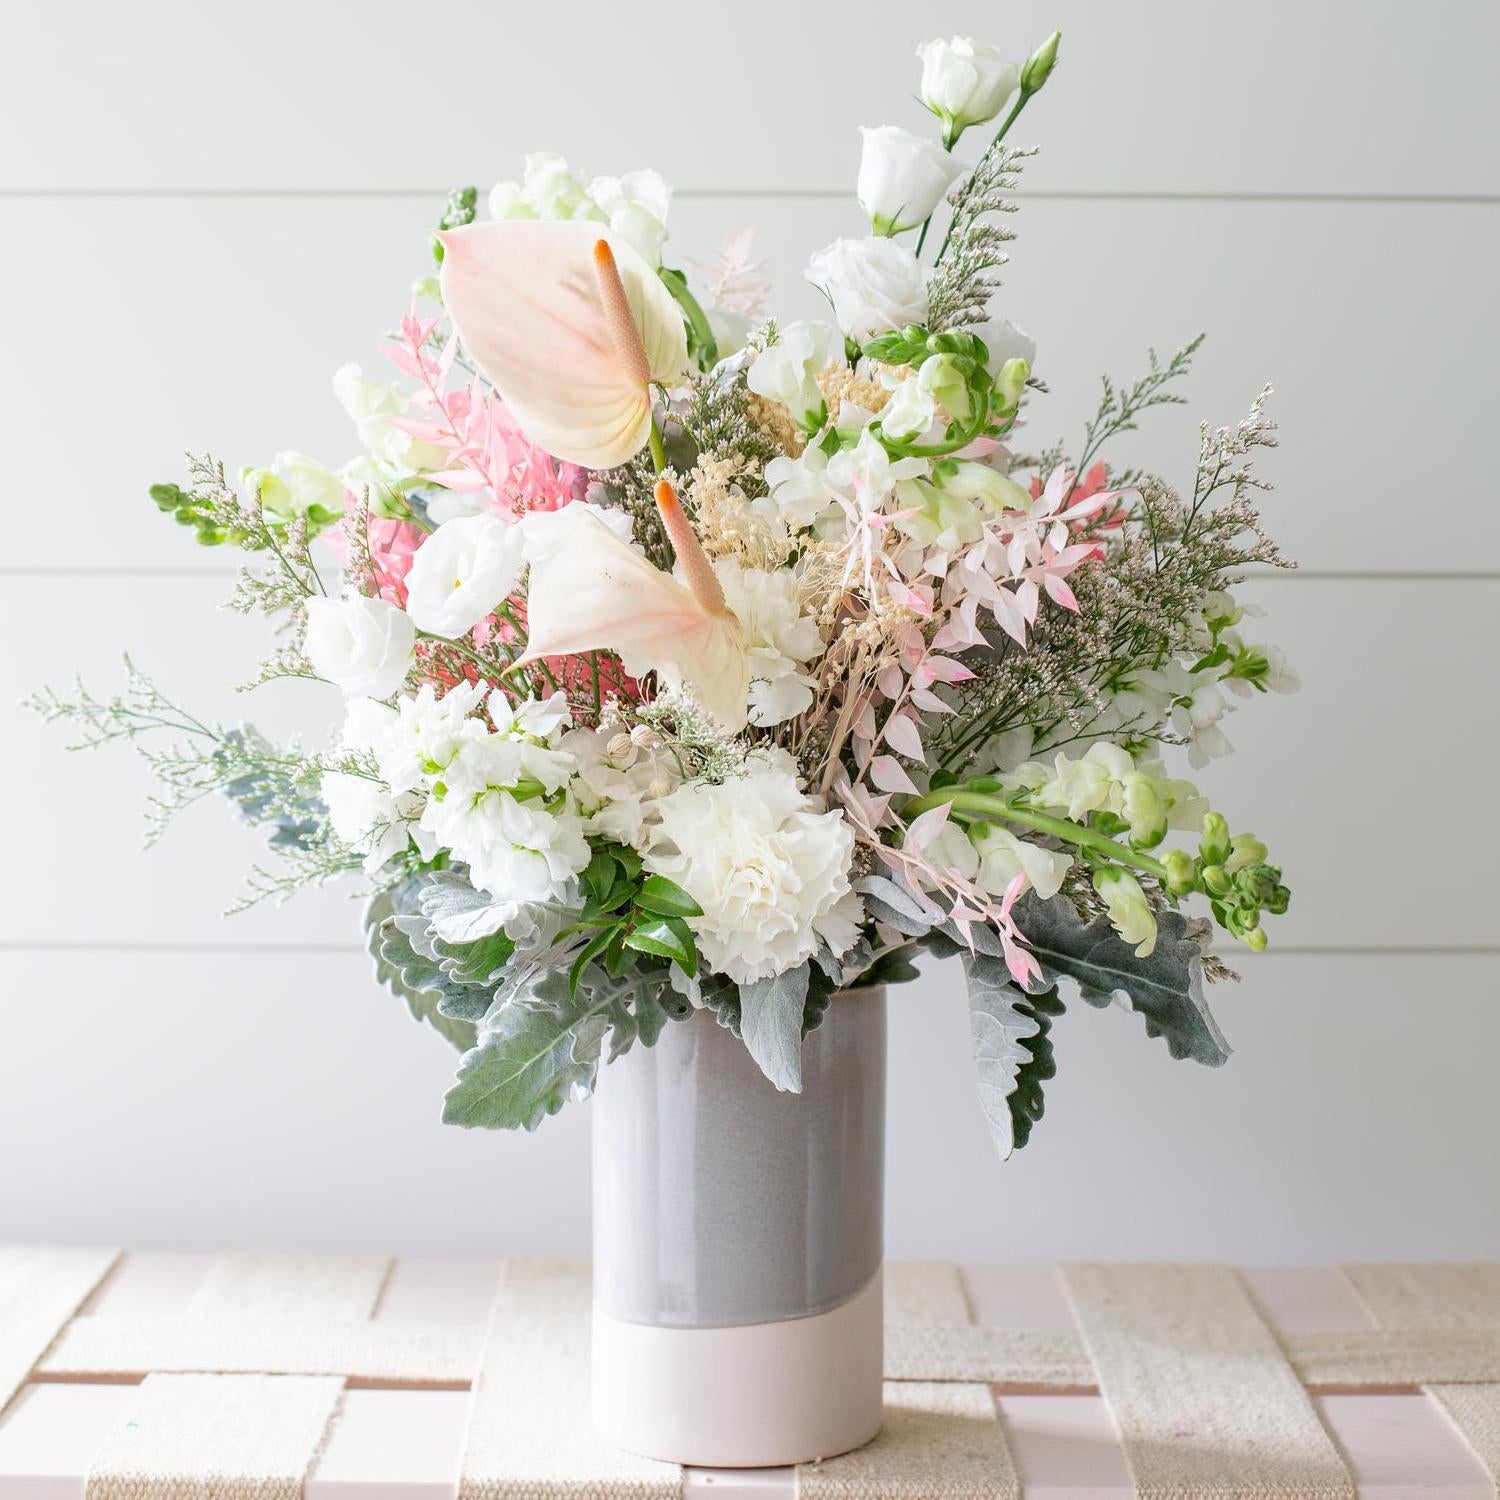 A lush bouquet of flowers, featuring pale pink calla lilies, white roses, and an assortment of greenery and filler flowers, is elegantly arranged in a grey ceramic essential vase placed on a light-colored wooden surface against a white horizontal panel backdrop.